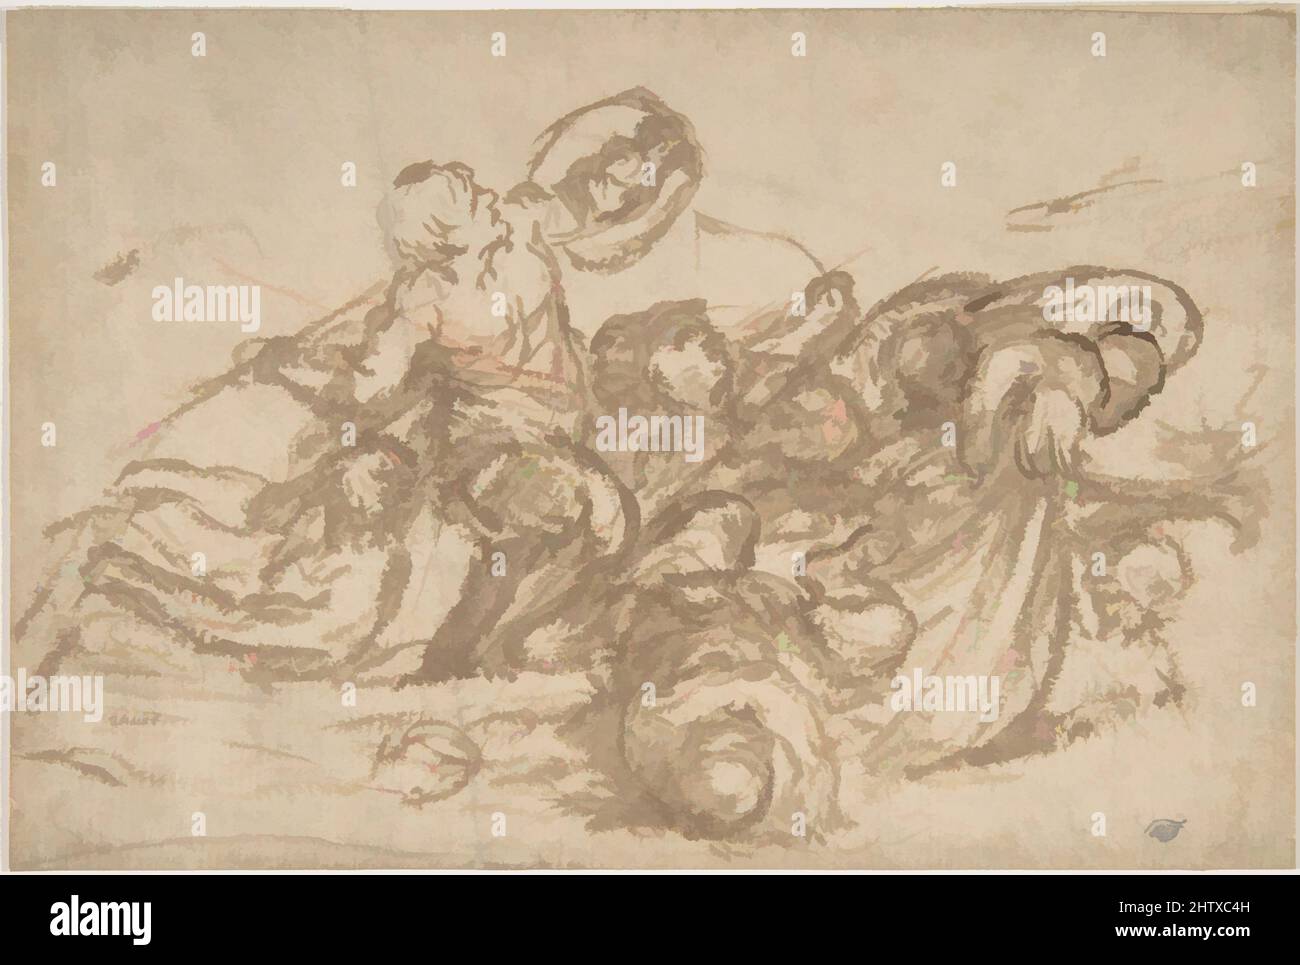 Art inspired by Sea Battle, 1596–1669, Brush and brown wash, 4 3/4 x 7 1/16in. (12.1 x 18cm), Drawings, Pietro da Cortona (Pietro Berrettini) (Italian, Cortona 1596–1669 Rome, Classic works modernized by Artotop with a splash of modernity. Shapes, color and value, eye-catching visual impact on art. Emotions through freedom of artworks in a contemporary way. A timeless message pursuing a wildly creative new direction. Artists turning to the digital medium and creating the Artotop NFT Stock Photo